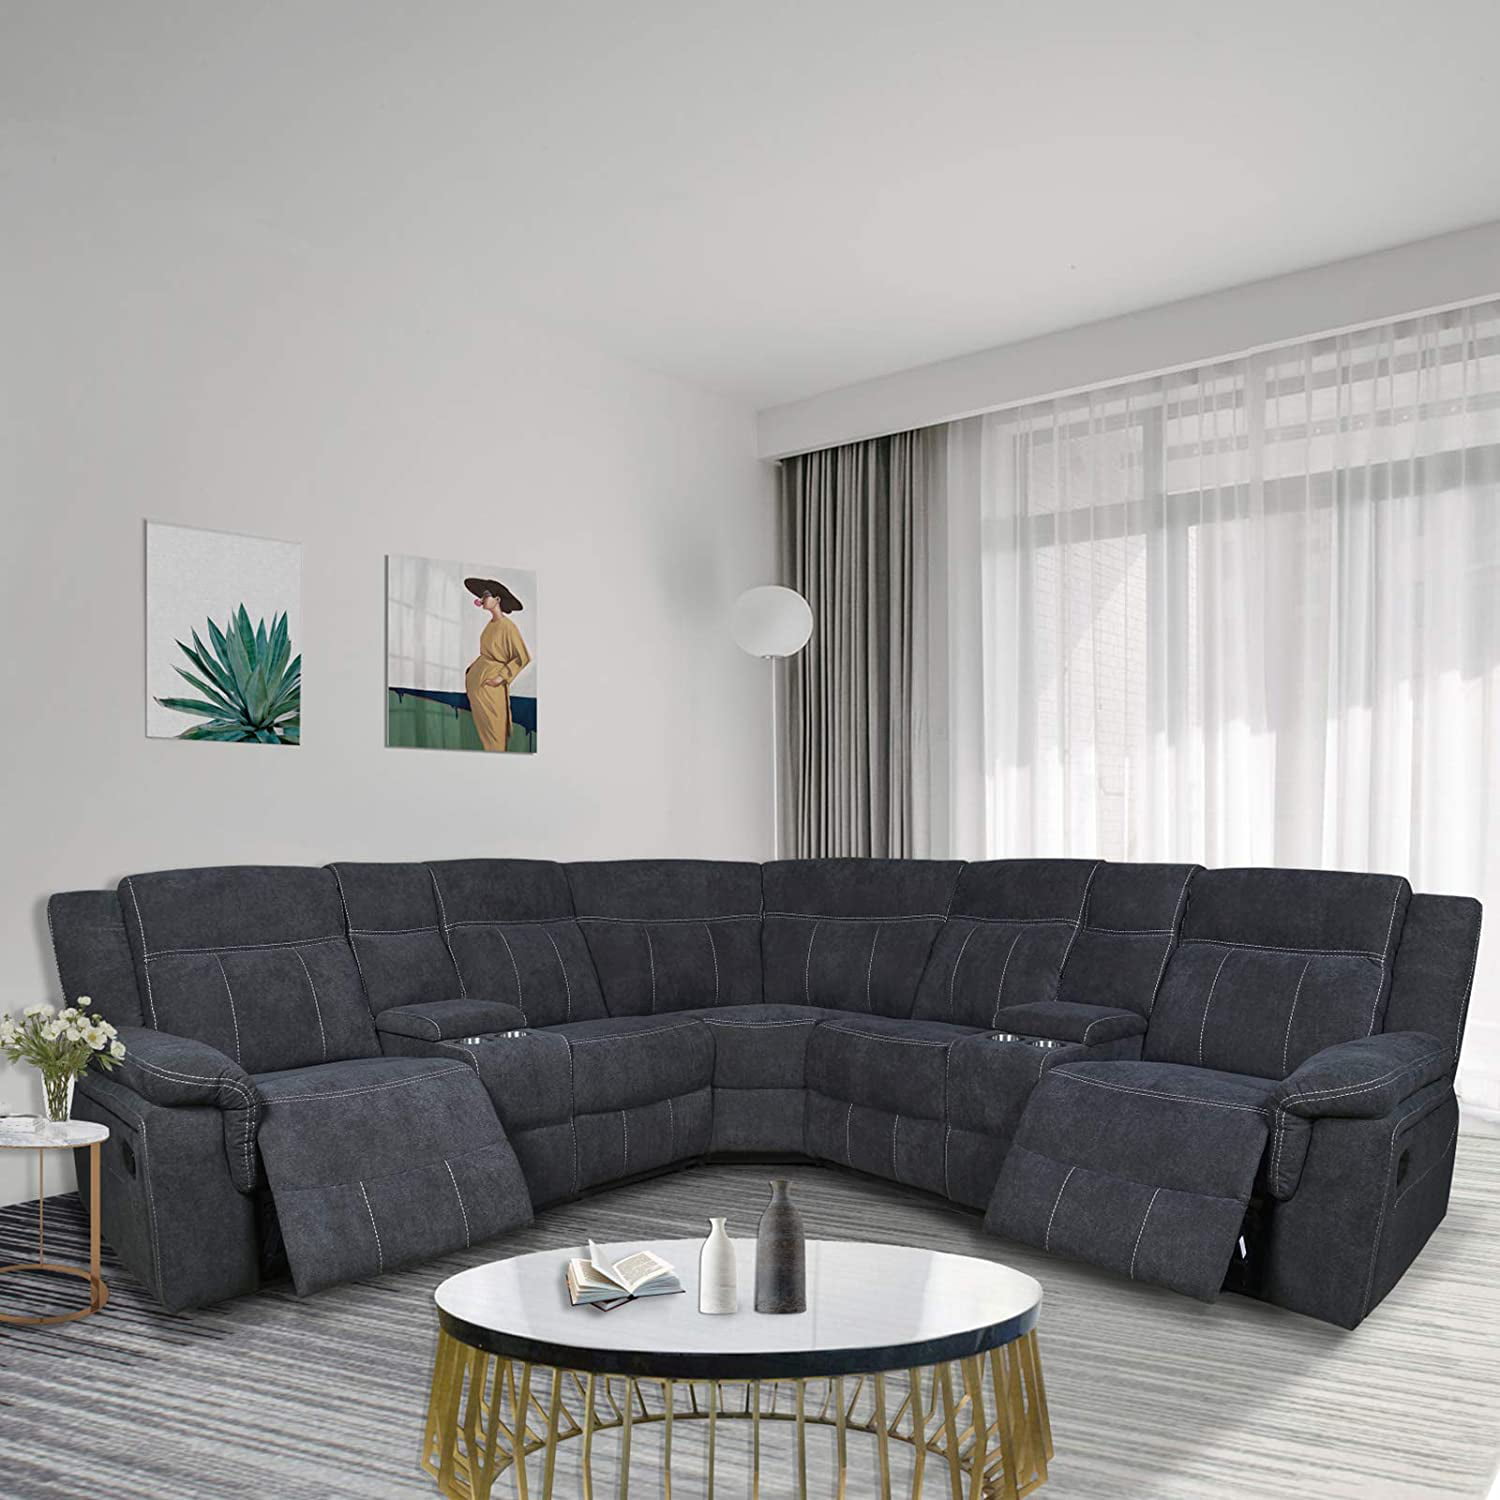 Reclining Sectional Sofa Power Motion, Grey Fabric Sectional Sofa With Recliner And Chaise Lounge